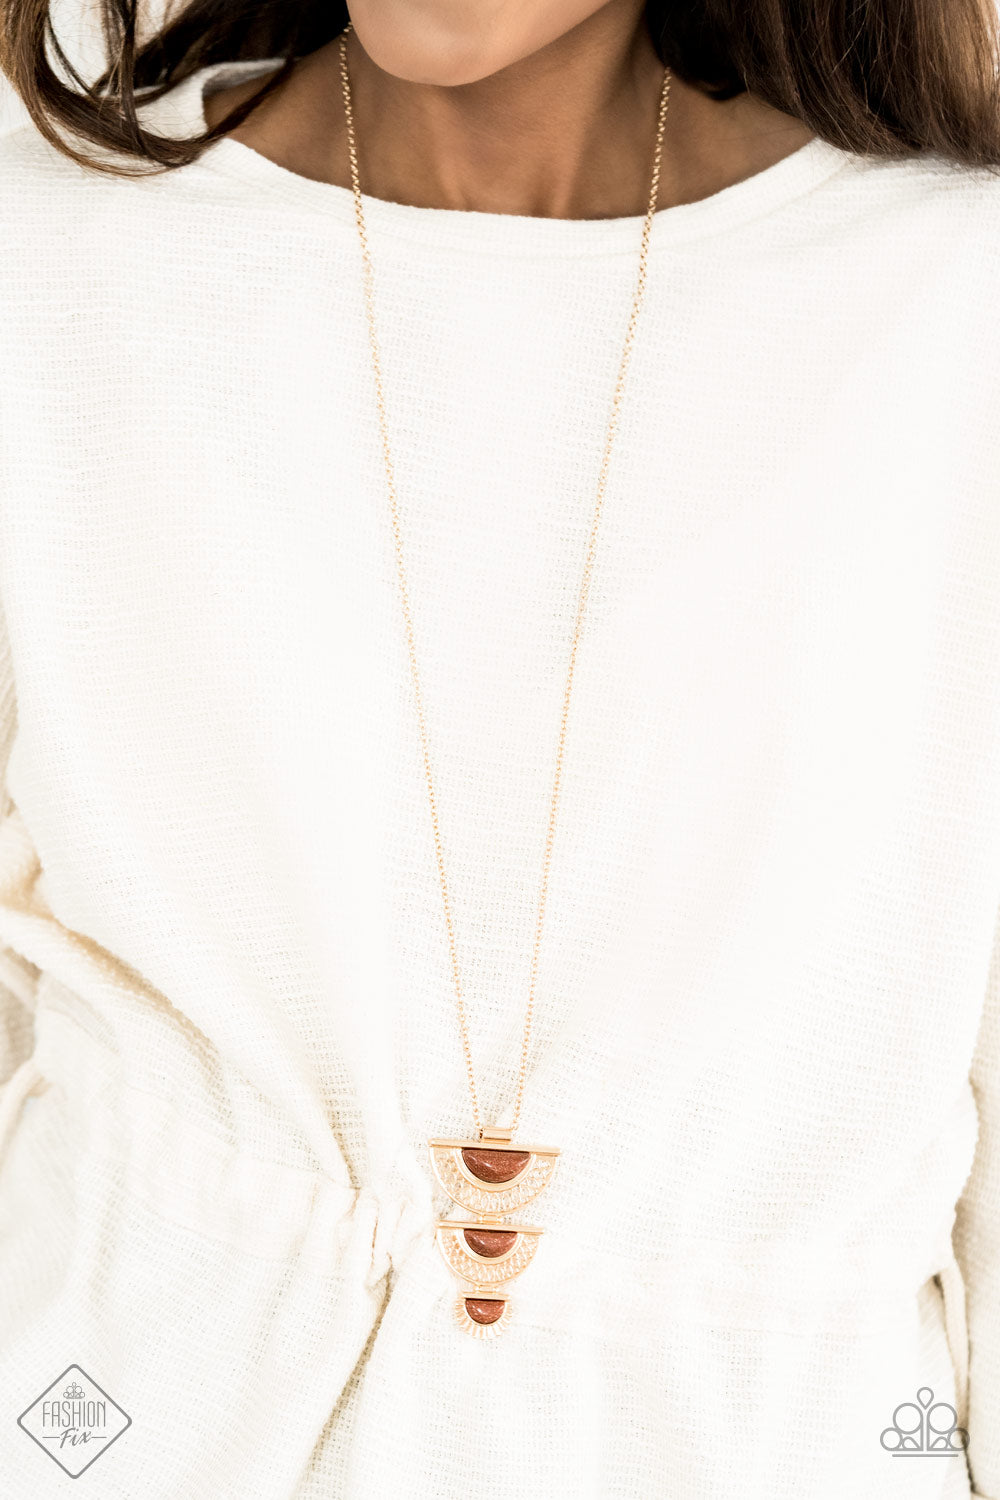 Paparazzi Serene Sheen Gold Long $5 Necklace. Get Free Shipping. #P2SE-GDXX-079UC